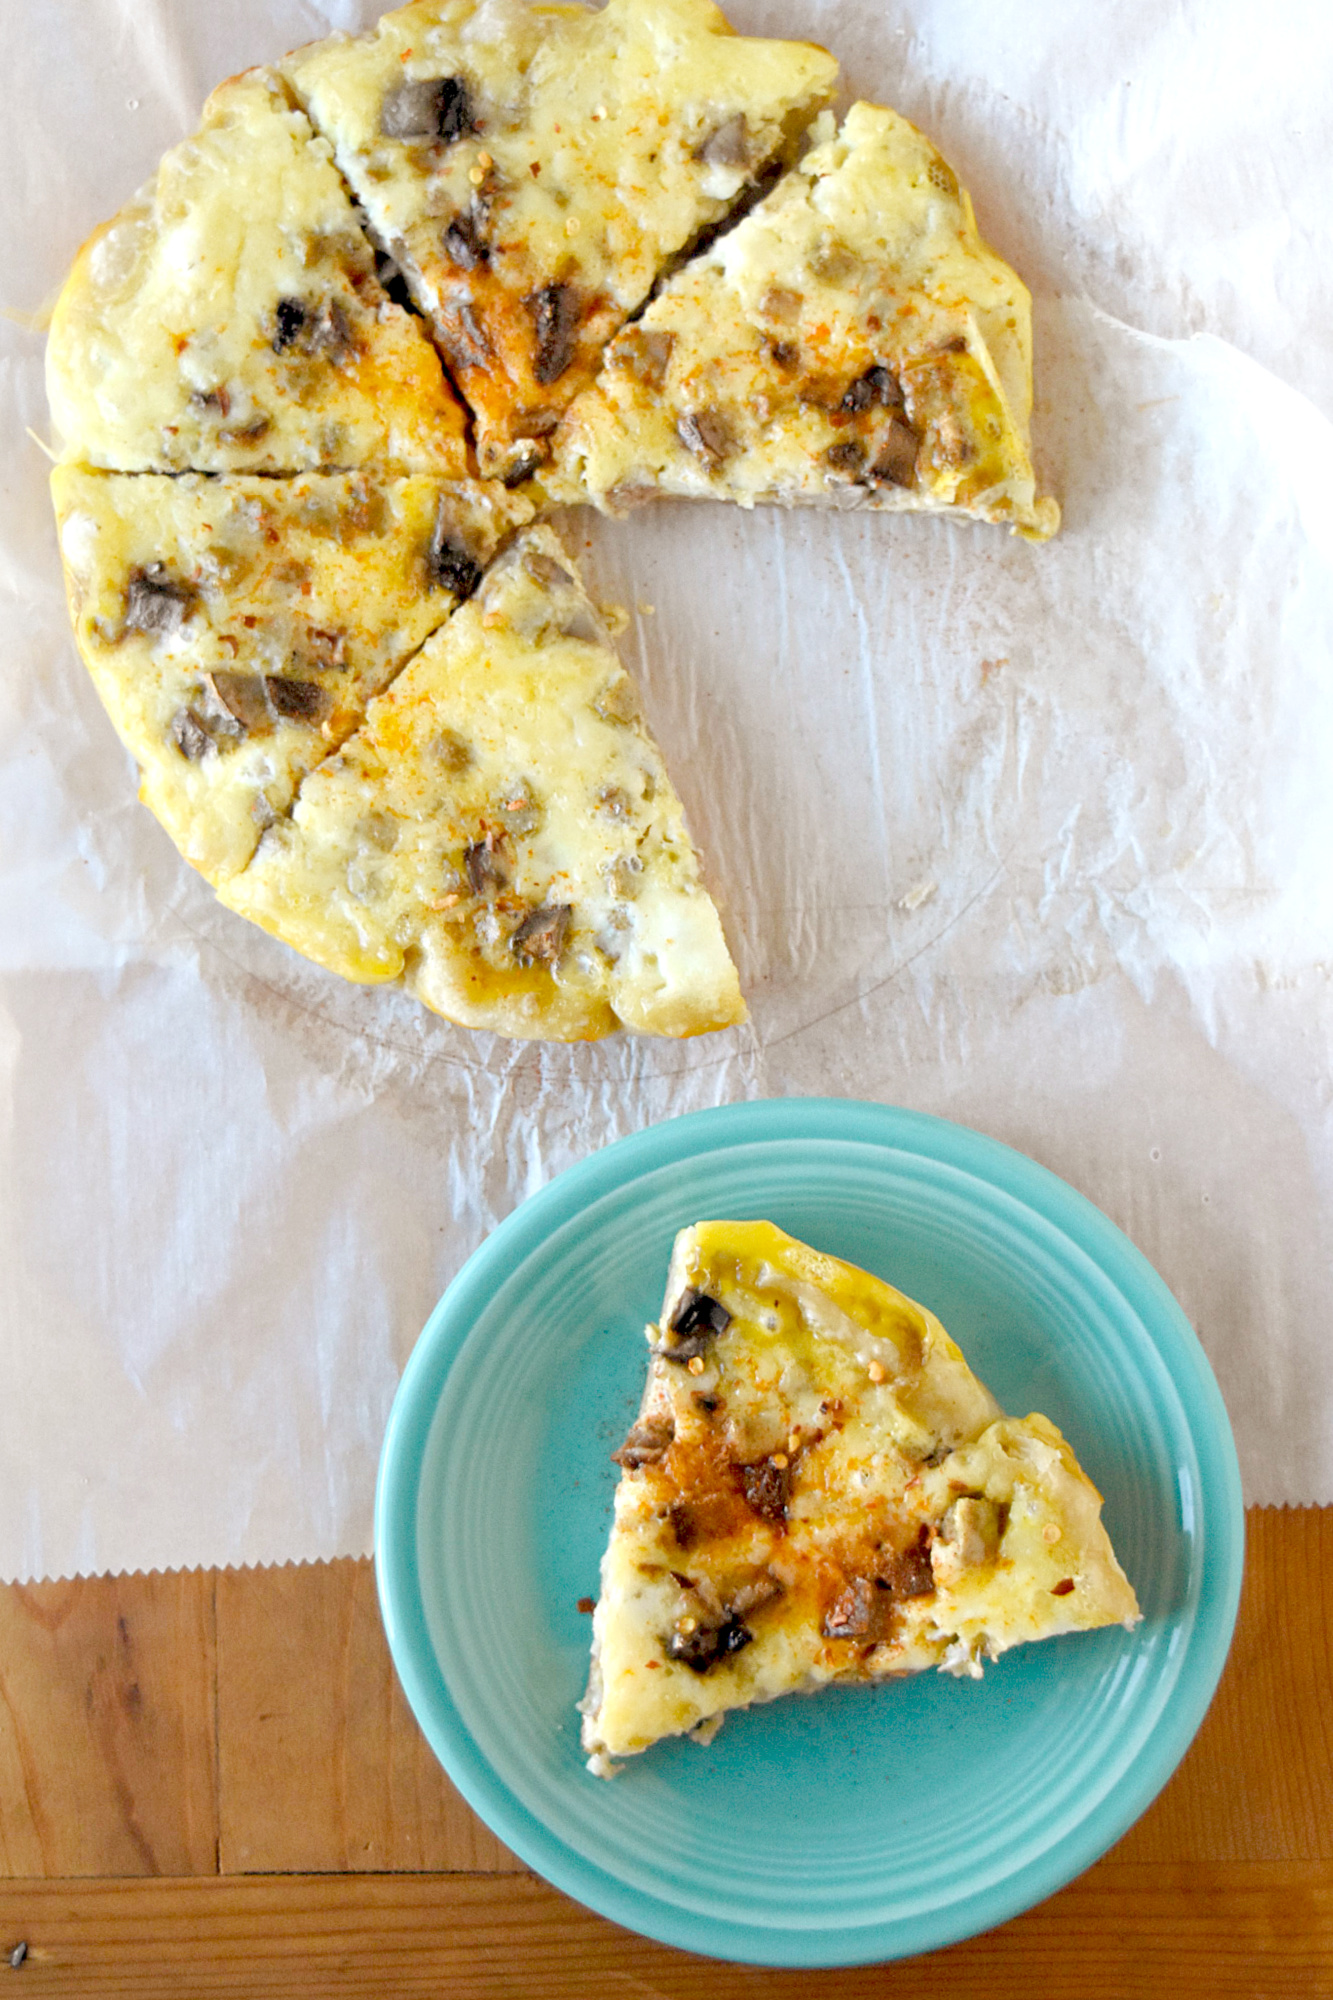 Simple Slow Cooker Breakfast Pizza is a recipe that you can toss in the slow cooker and feed the hungry masses. It’s topped with sausage and mushrooms, but you can add whatever toppings you wish! #NationSlowCookerMonth